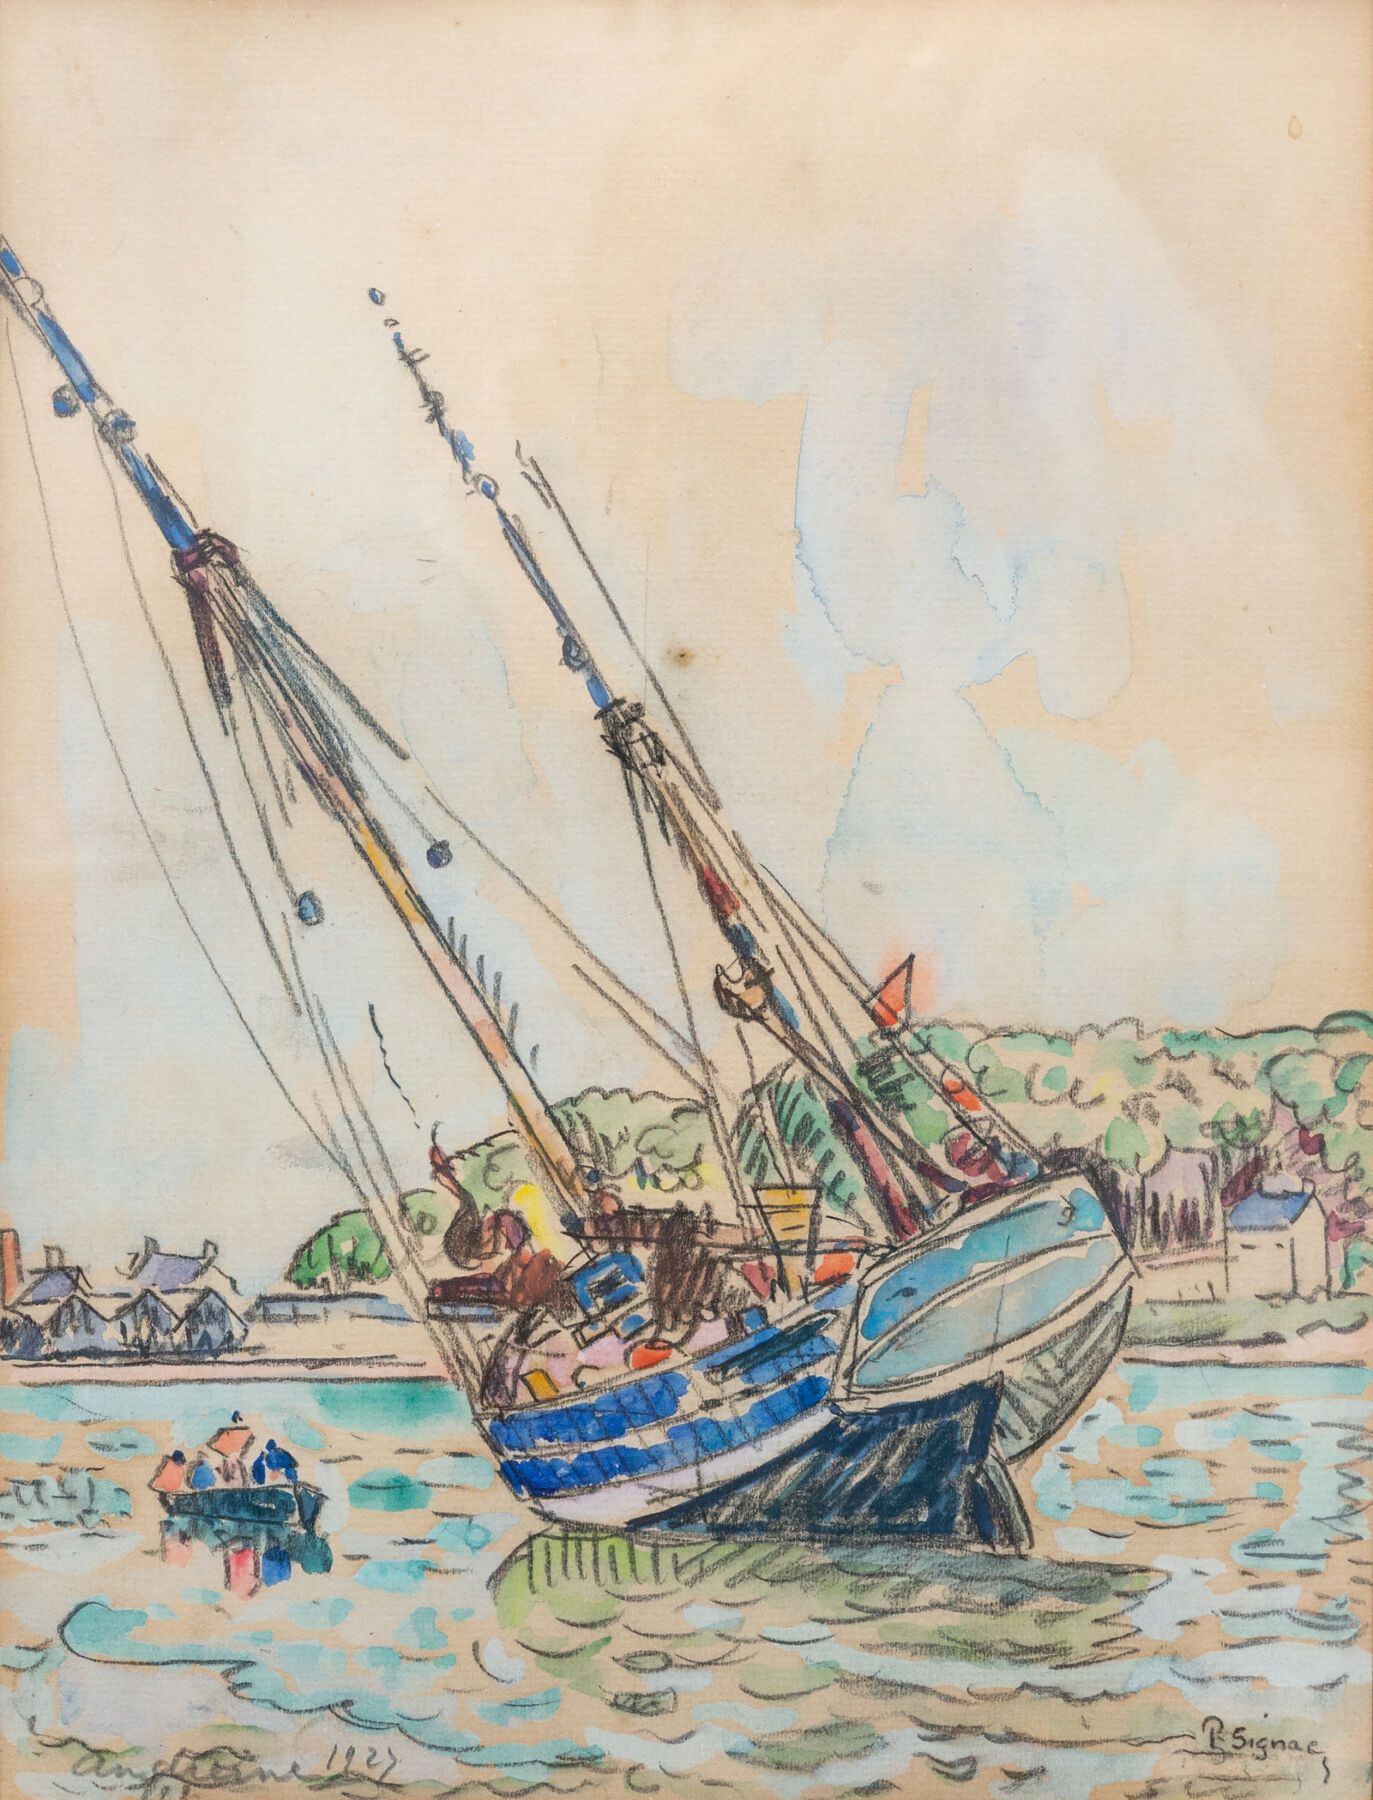 Null Paul SIGNAC (1863-1935).

Boat at Anchor, Audierne, 1927.

Watercolor on pe&hellip;